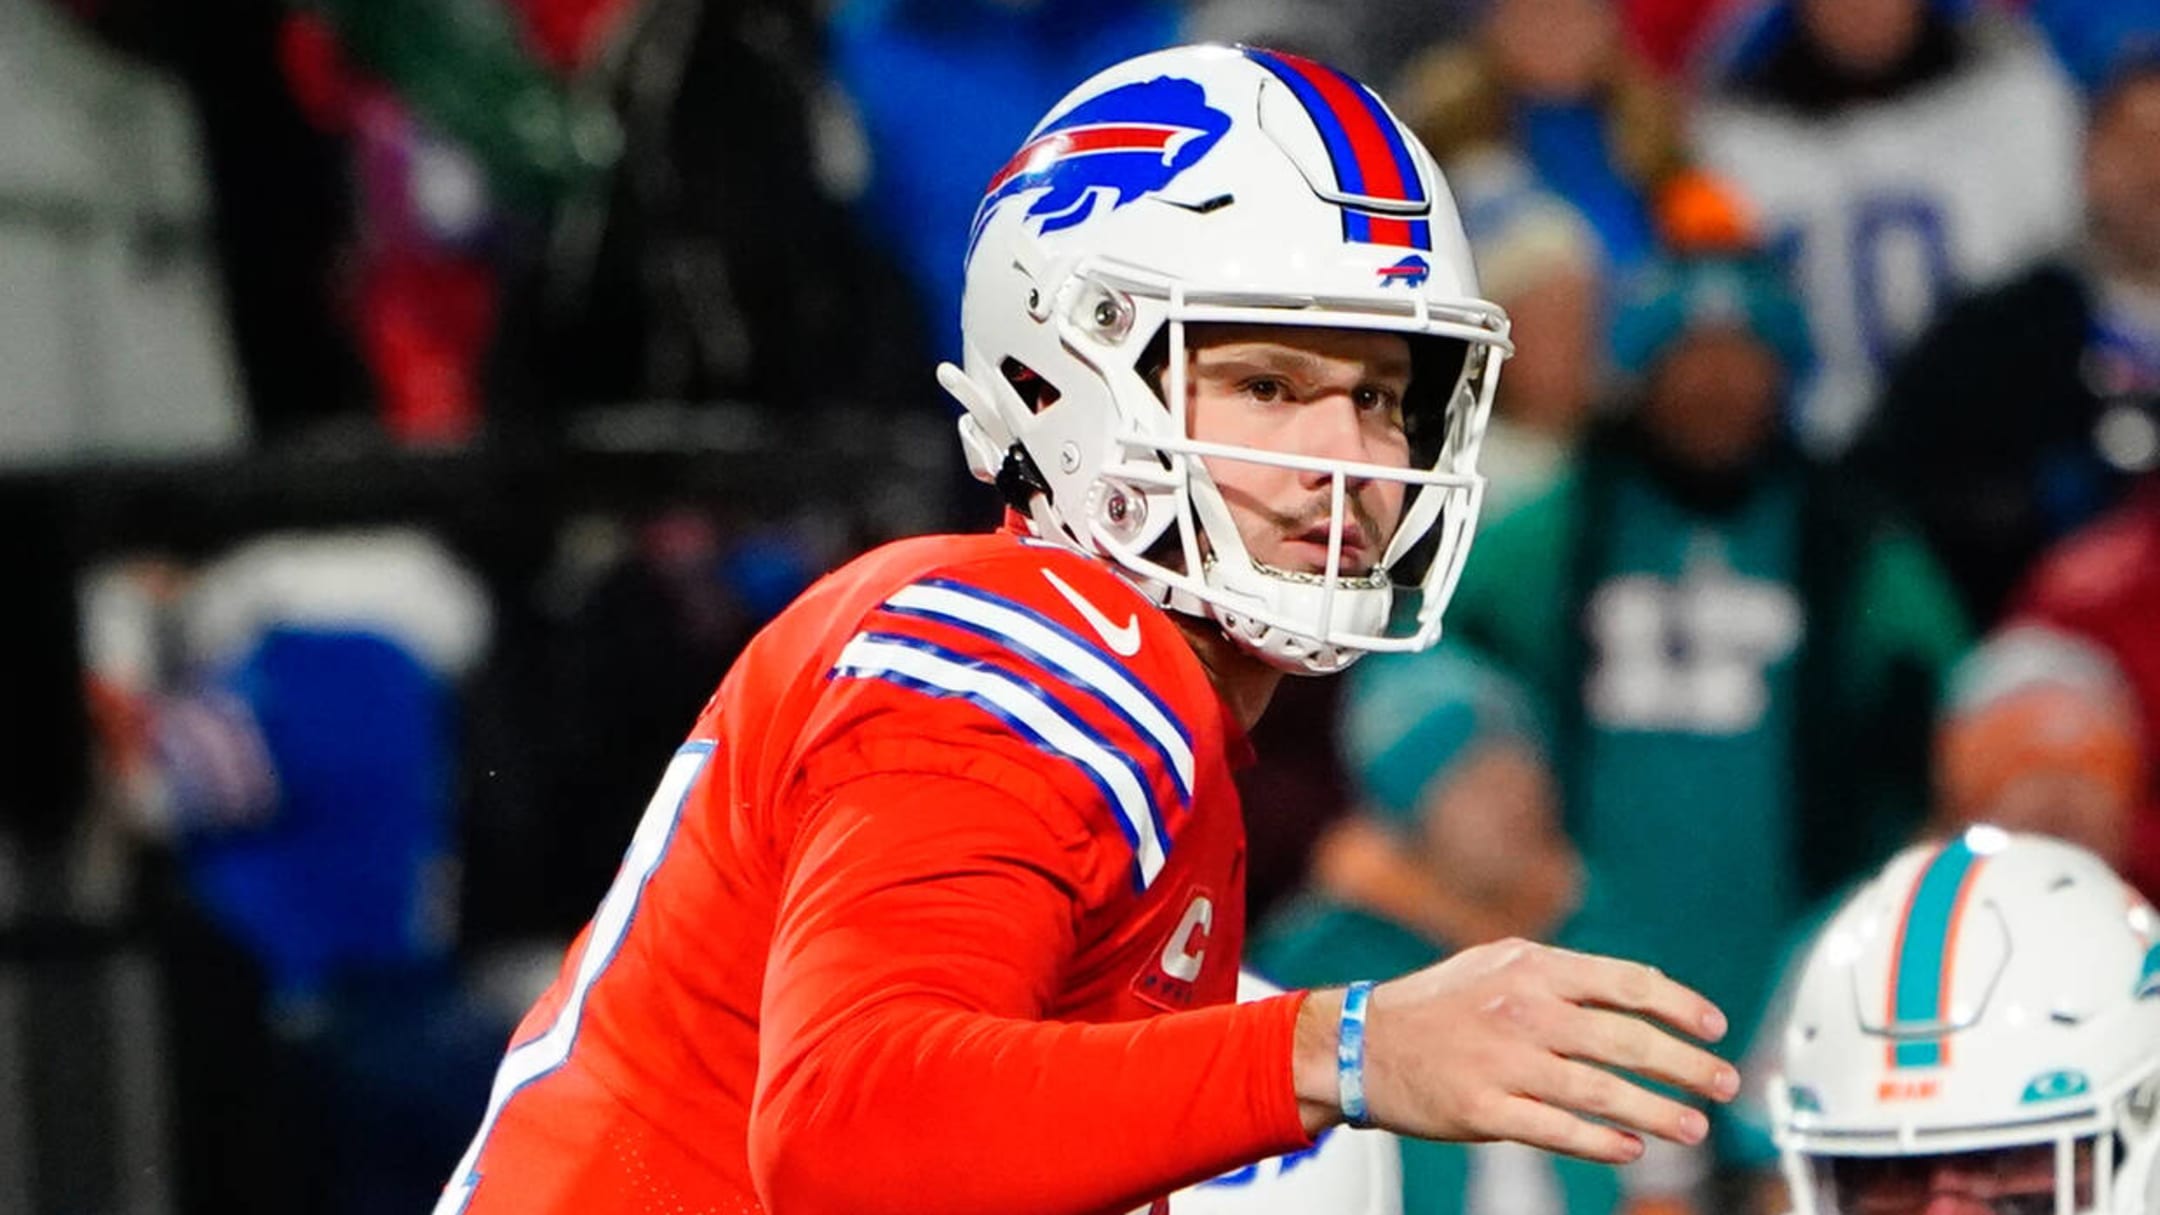 Bengals, Bills is a historic 'MNF' matchup